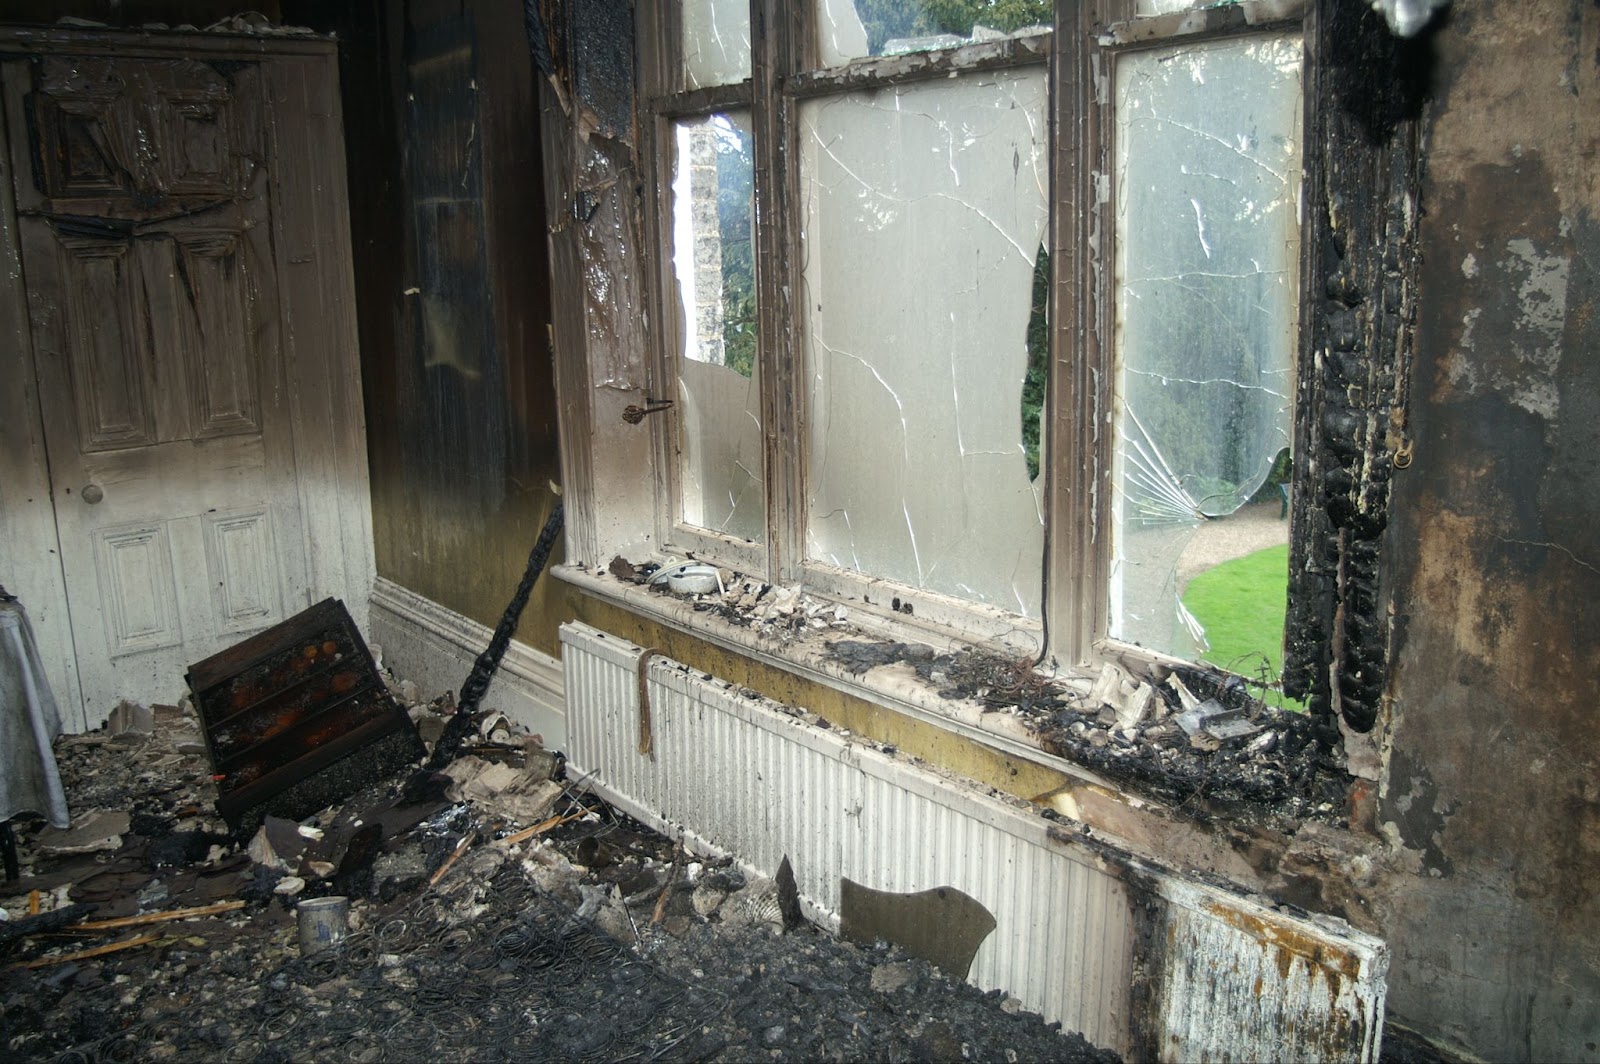 A burnt room with a broken window, showing smoke damage. Smoke particles visible.